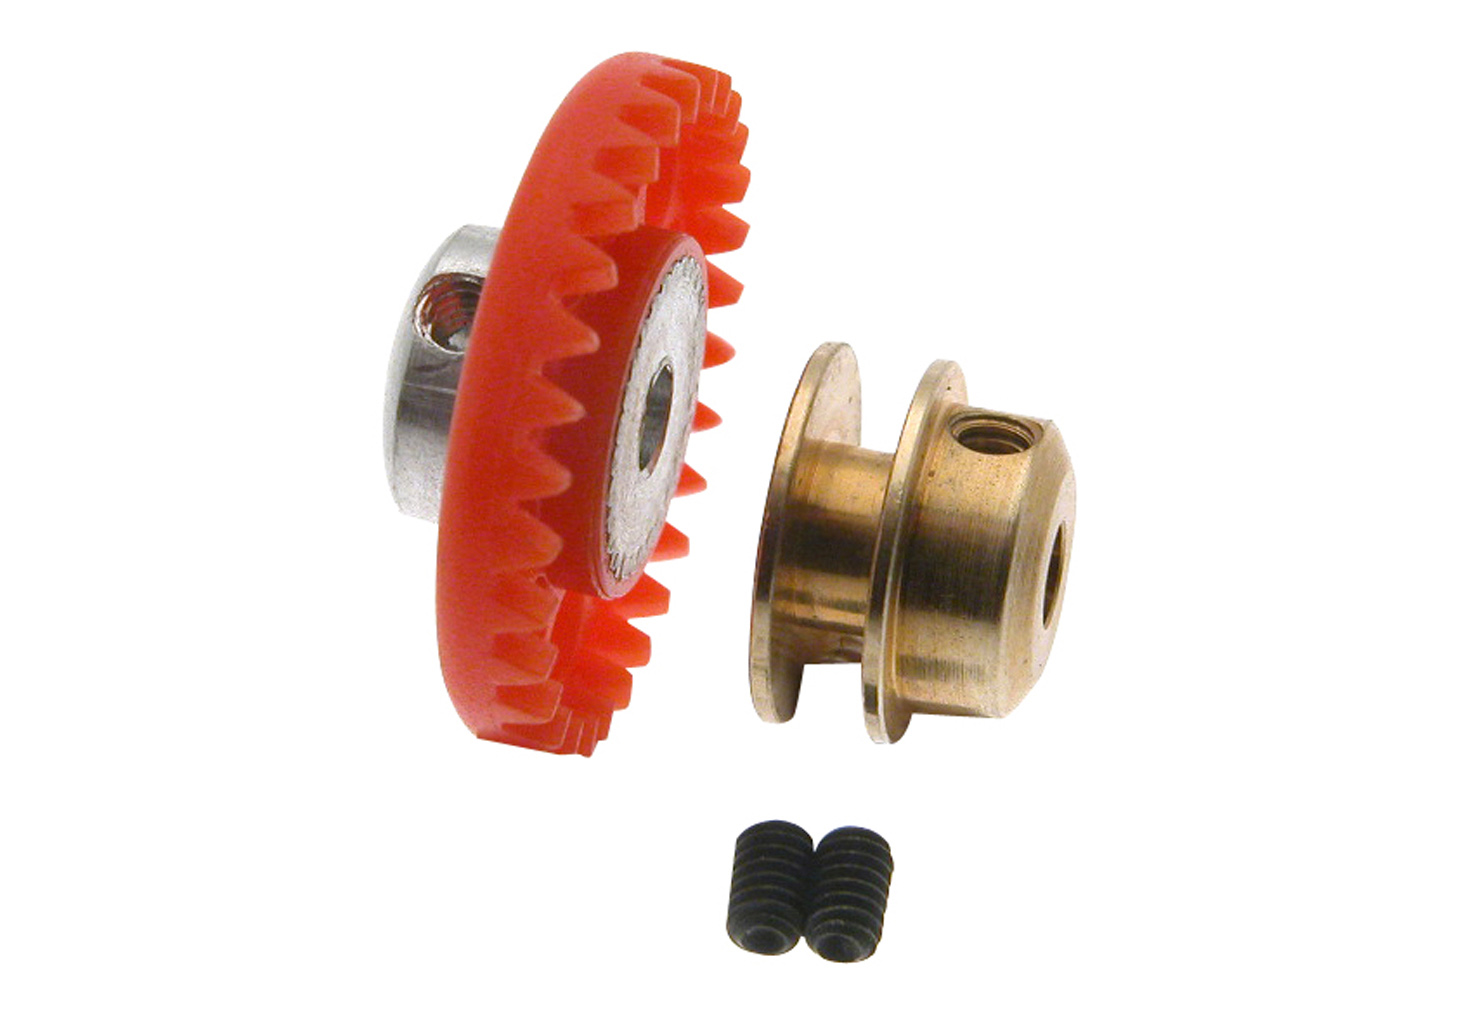 SC-1100 Nylon crown Gear 30t.  M50 with M2 screw for 3/32" axle